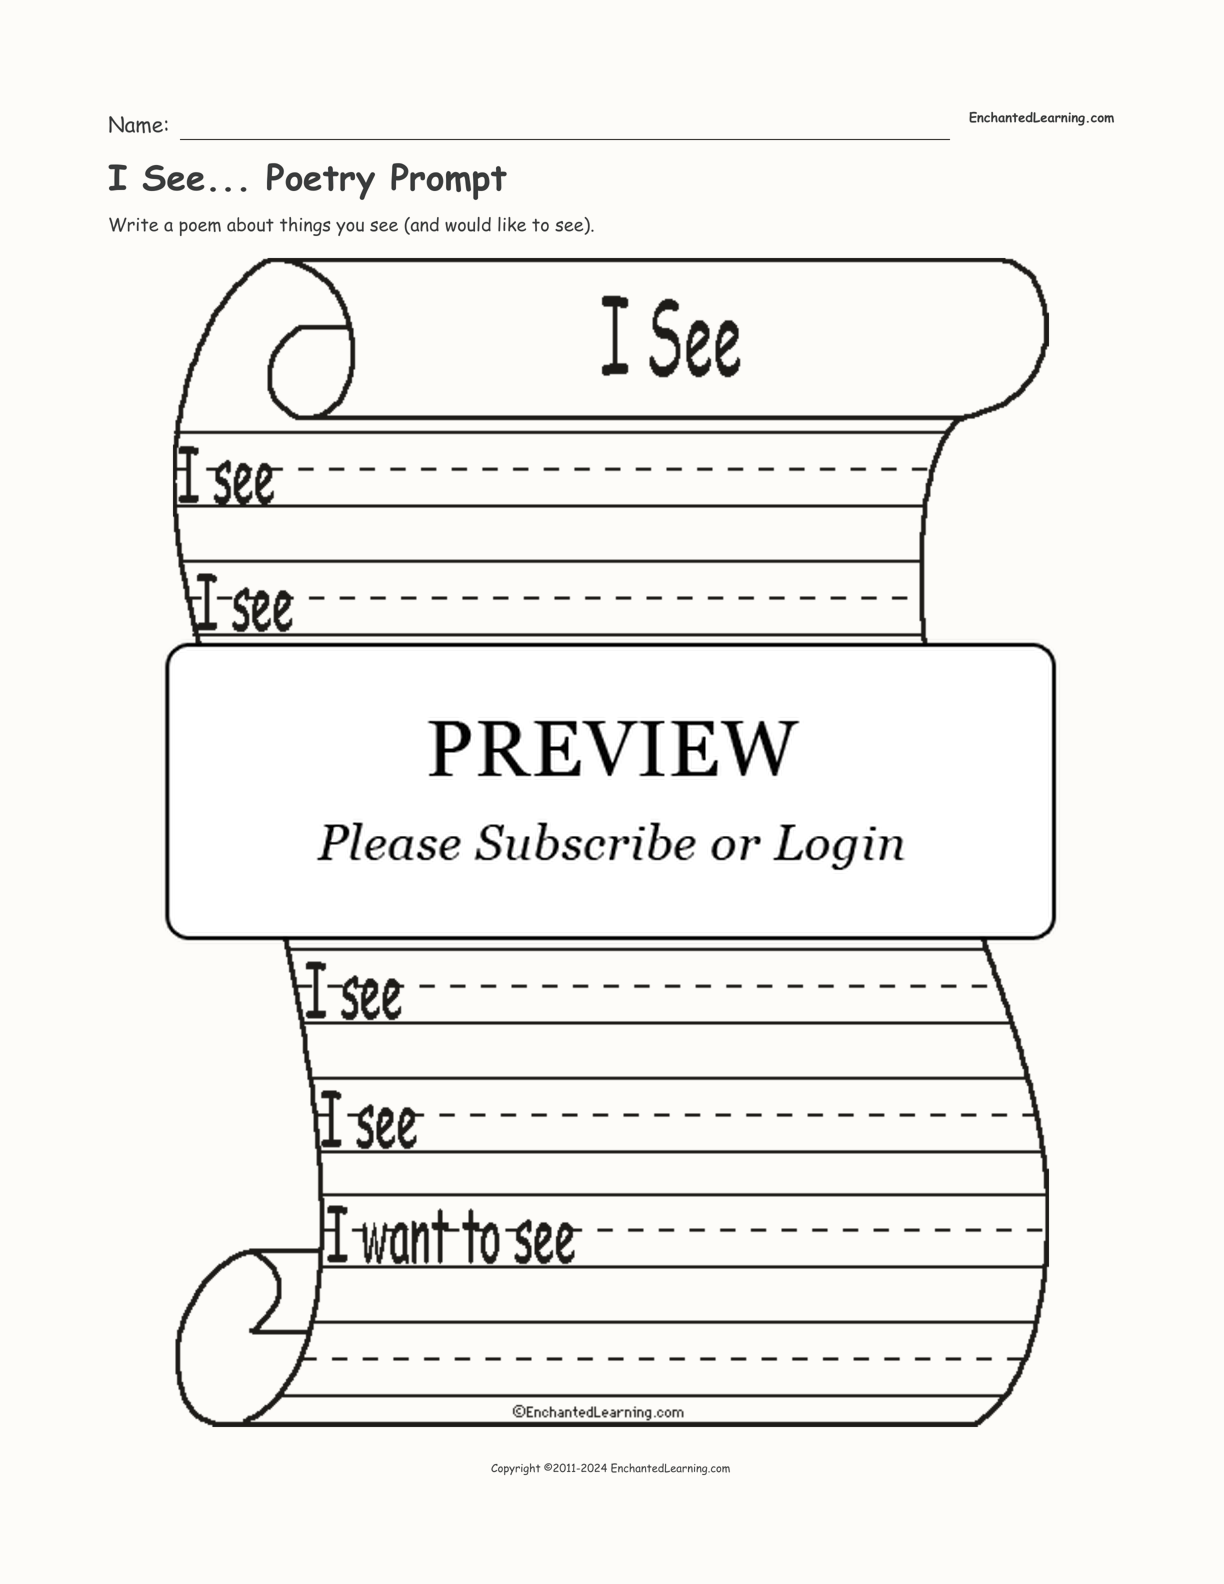 I See... Poetry Prompt interactive worksheet page 1